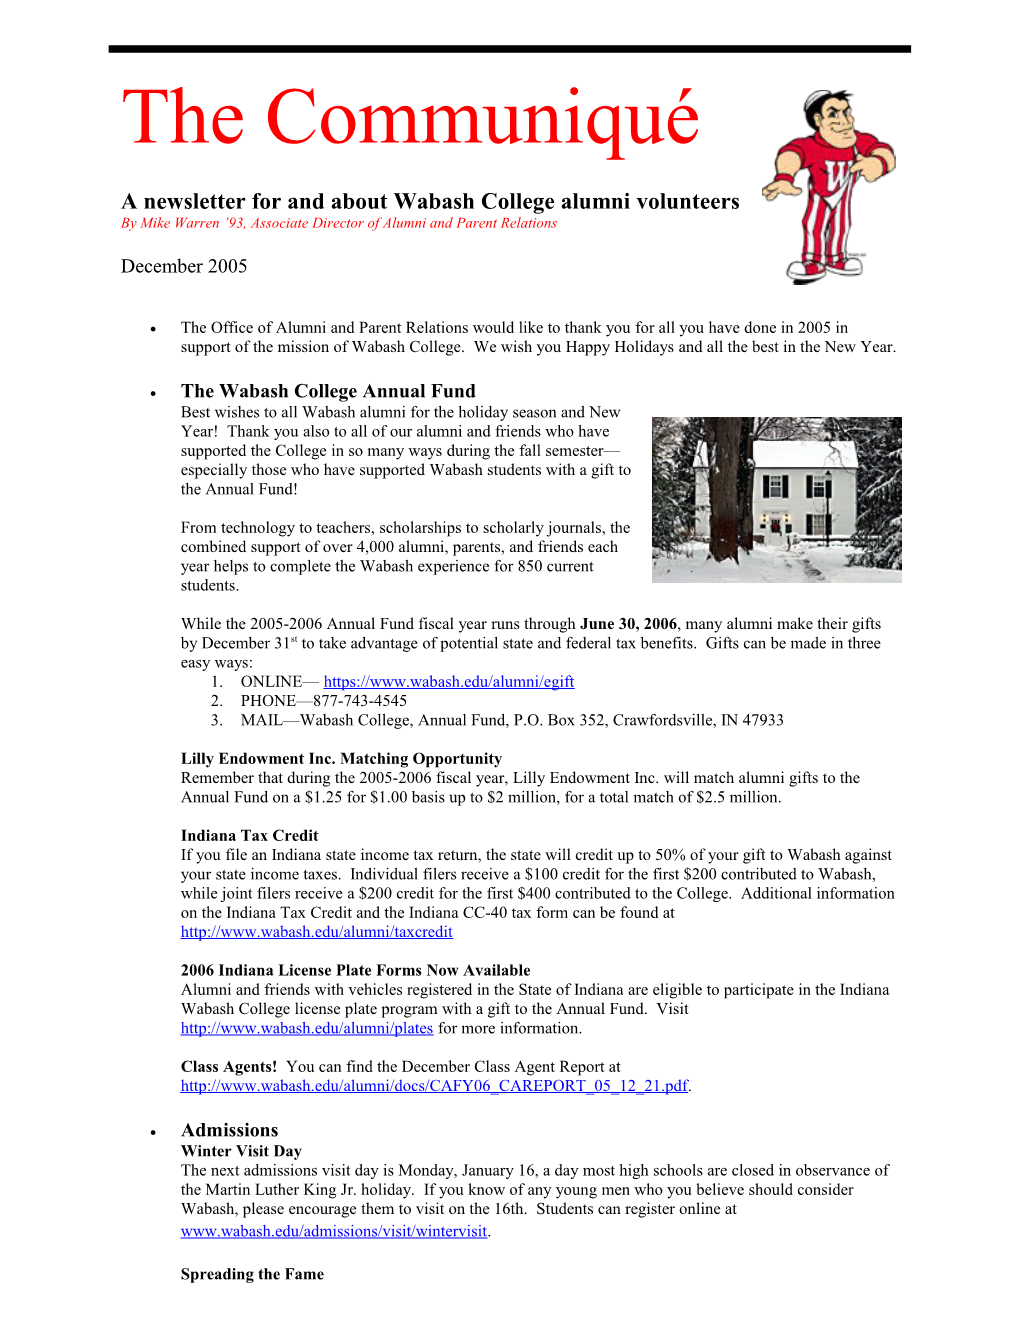 A Newsletter for and About Wabash College Alumni Volunteers